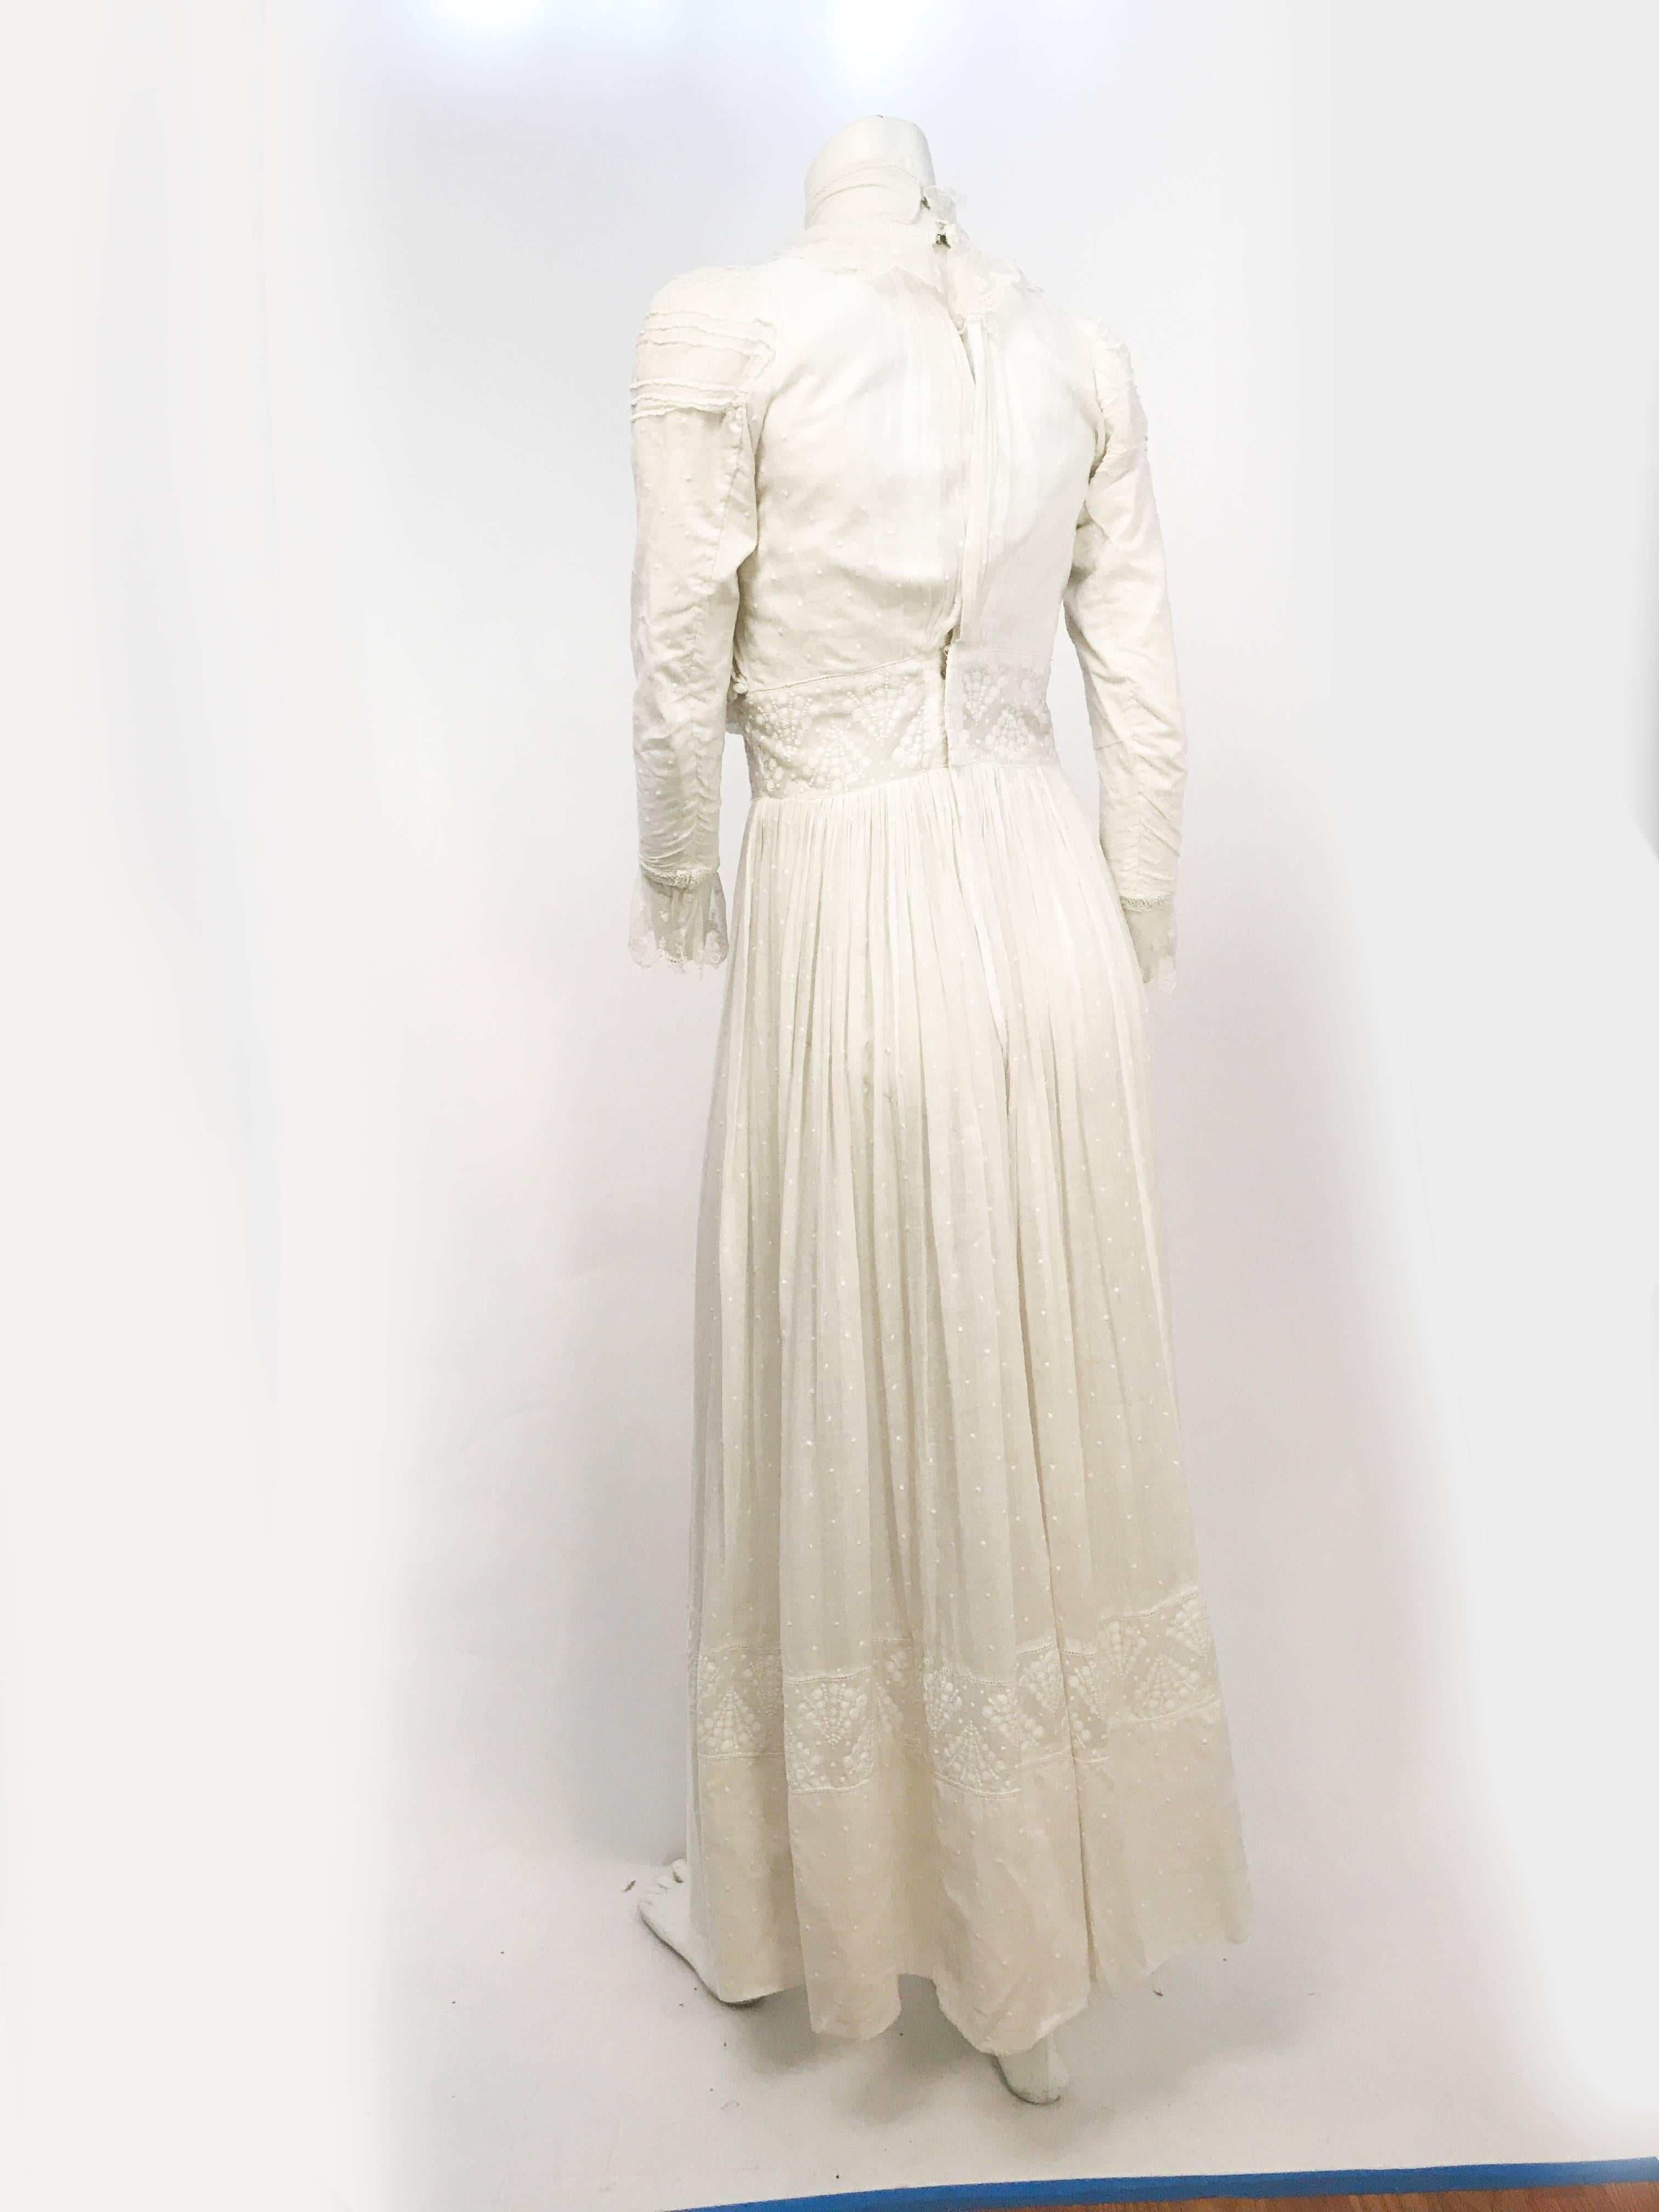 Edwardian White Wedding/Lawn Dress with Lace Details. White cotton dress with Swiss dot cotton, machine lace around the neckline and sleeves, and high collar. It has the classic pigeon bust shape, appropriate for Edwardian dresses.